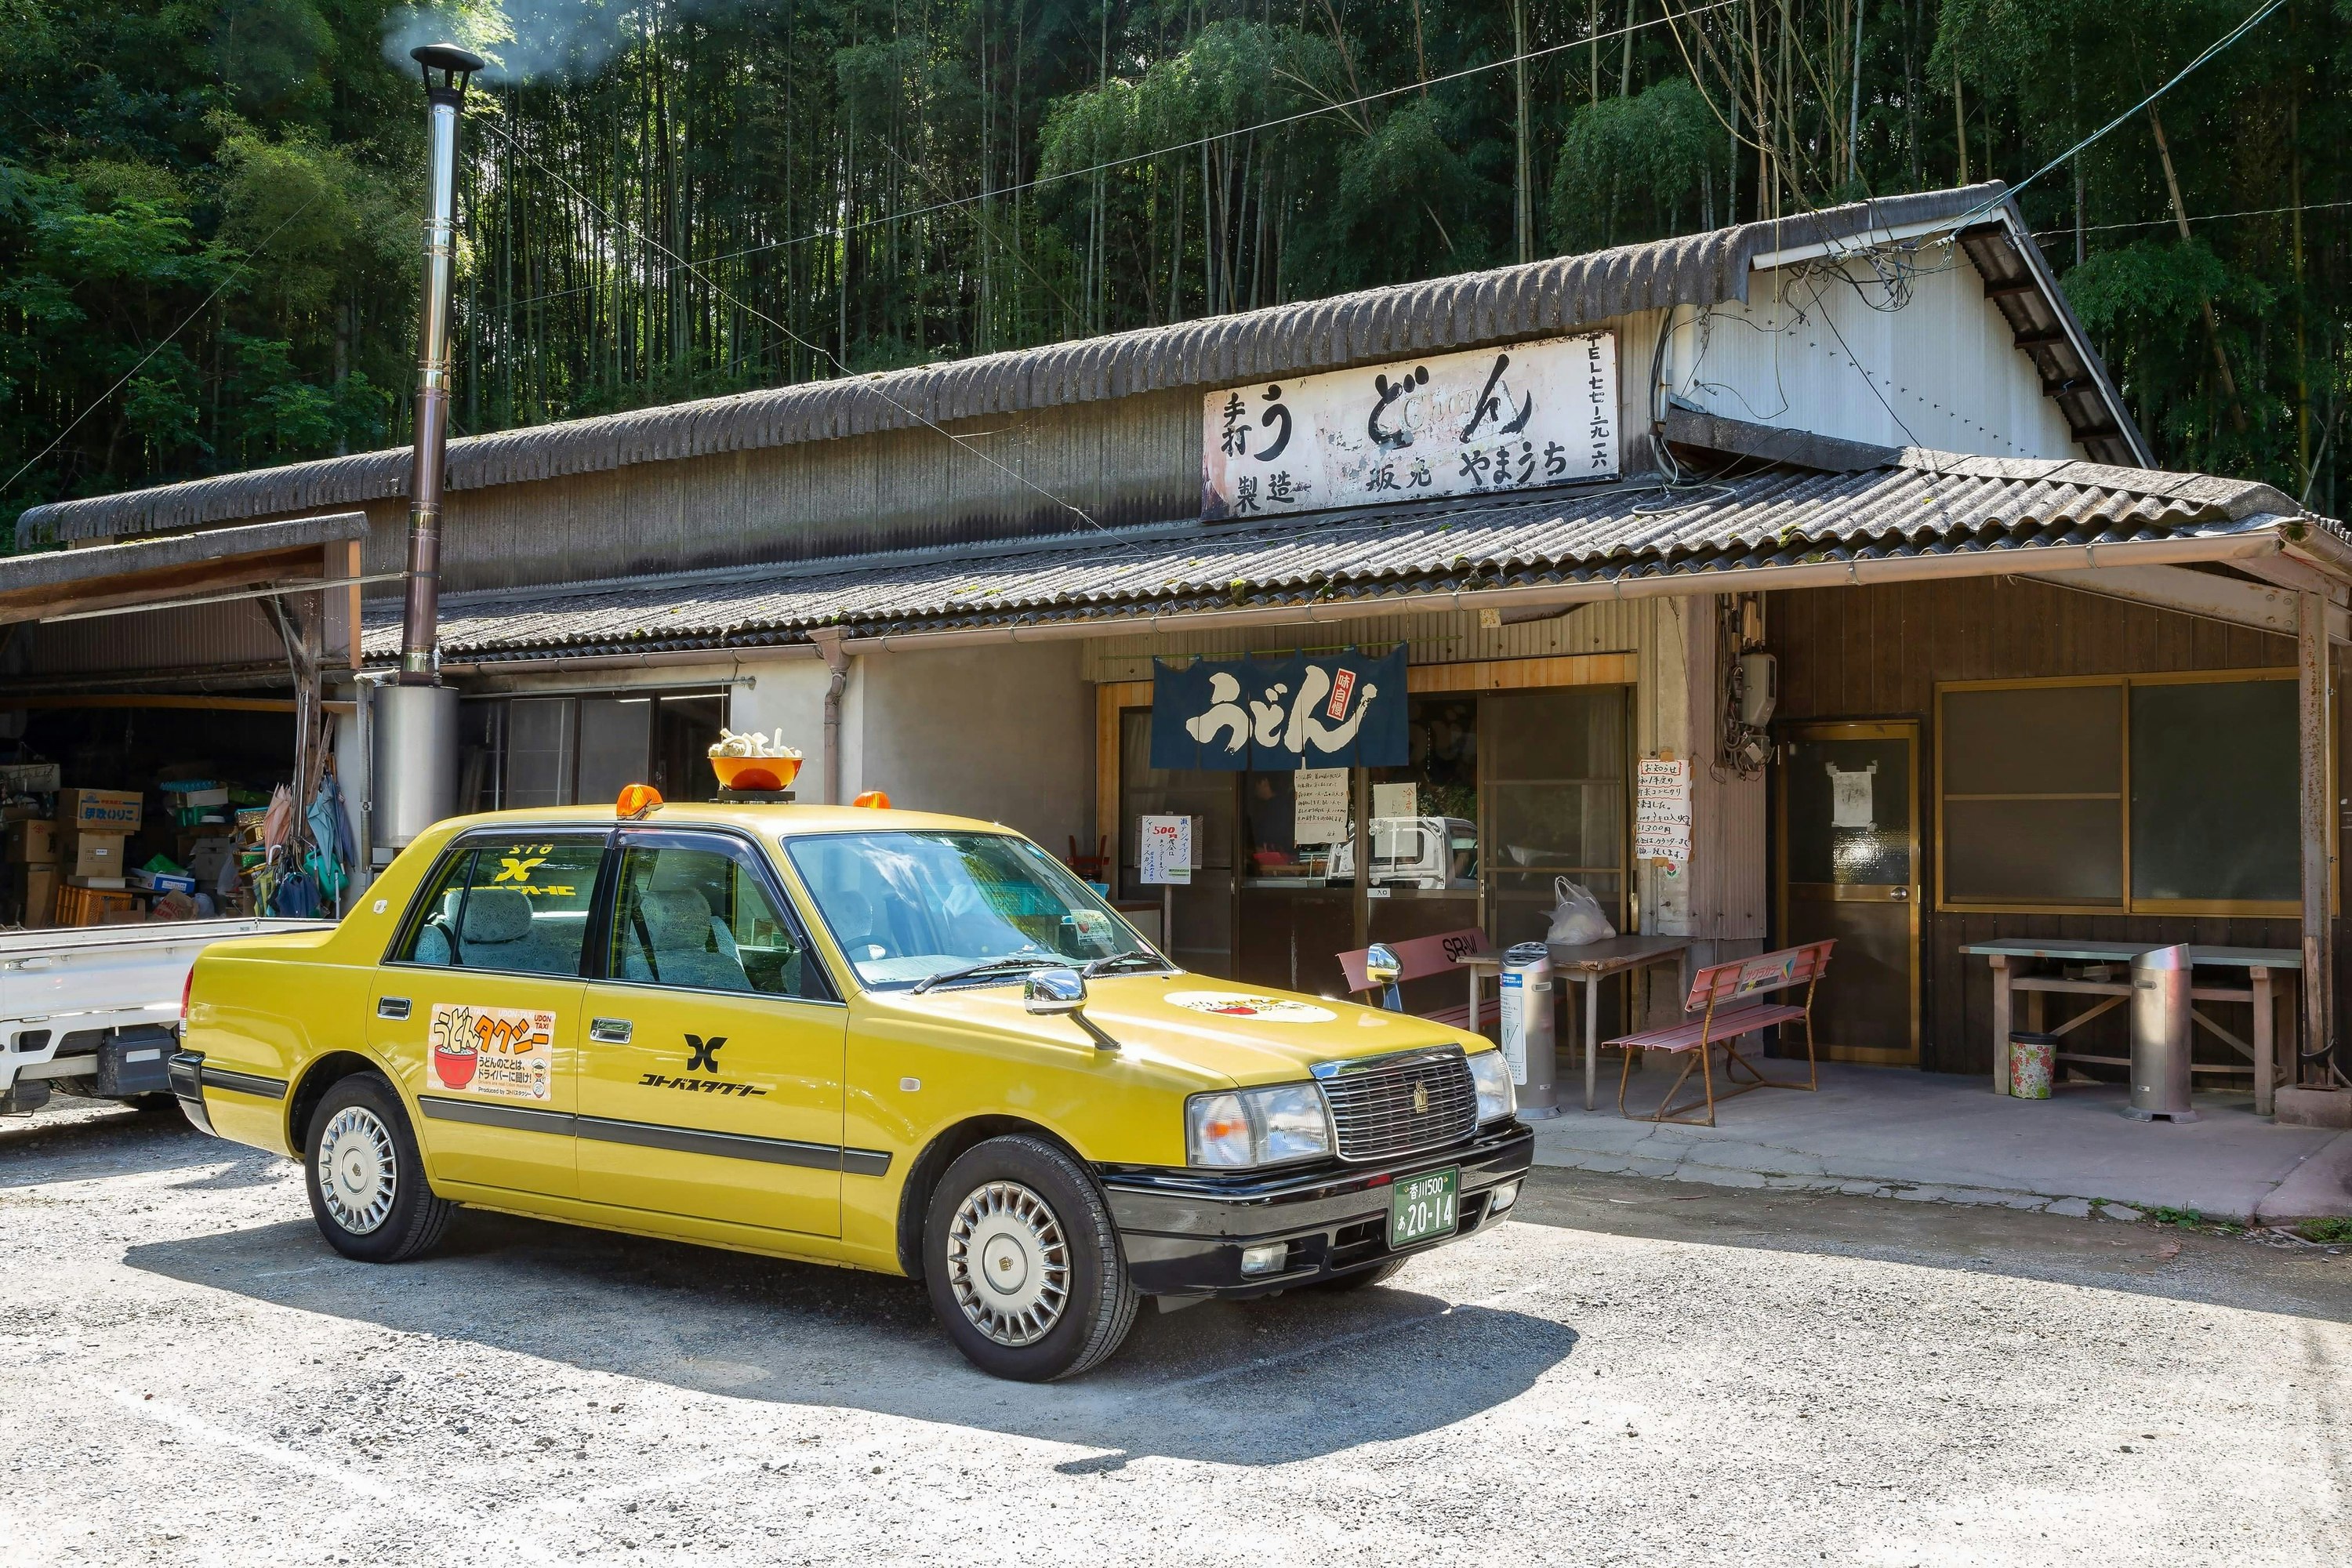 A yellow sedan taxi cab with the name of the taxi company emblazoned on the door in black and a sticker showing a cartoon ramen bowl with the noodles forming letters and a large 3D bowl of ramen on the roof where a police siren would be sits in front of a noodle stand with a tile roof in Kagawa, Japan